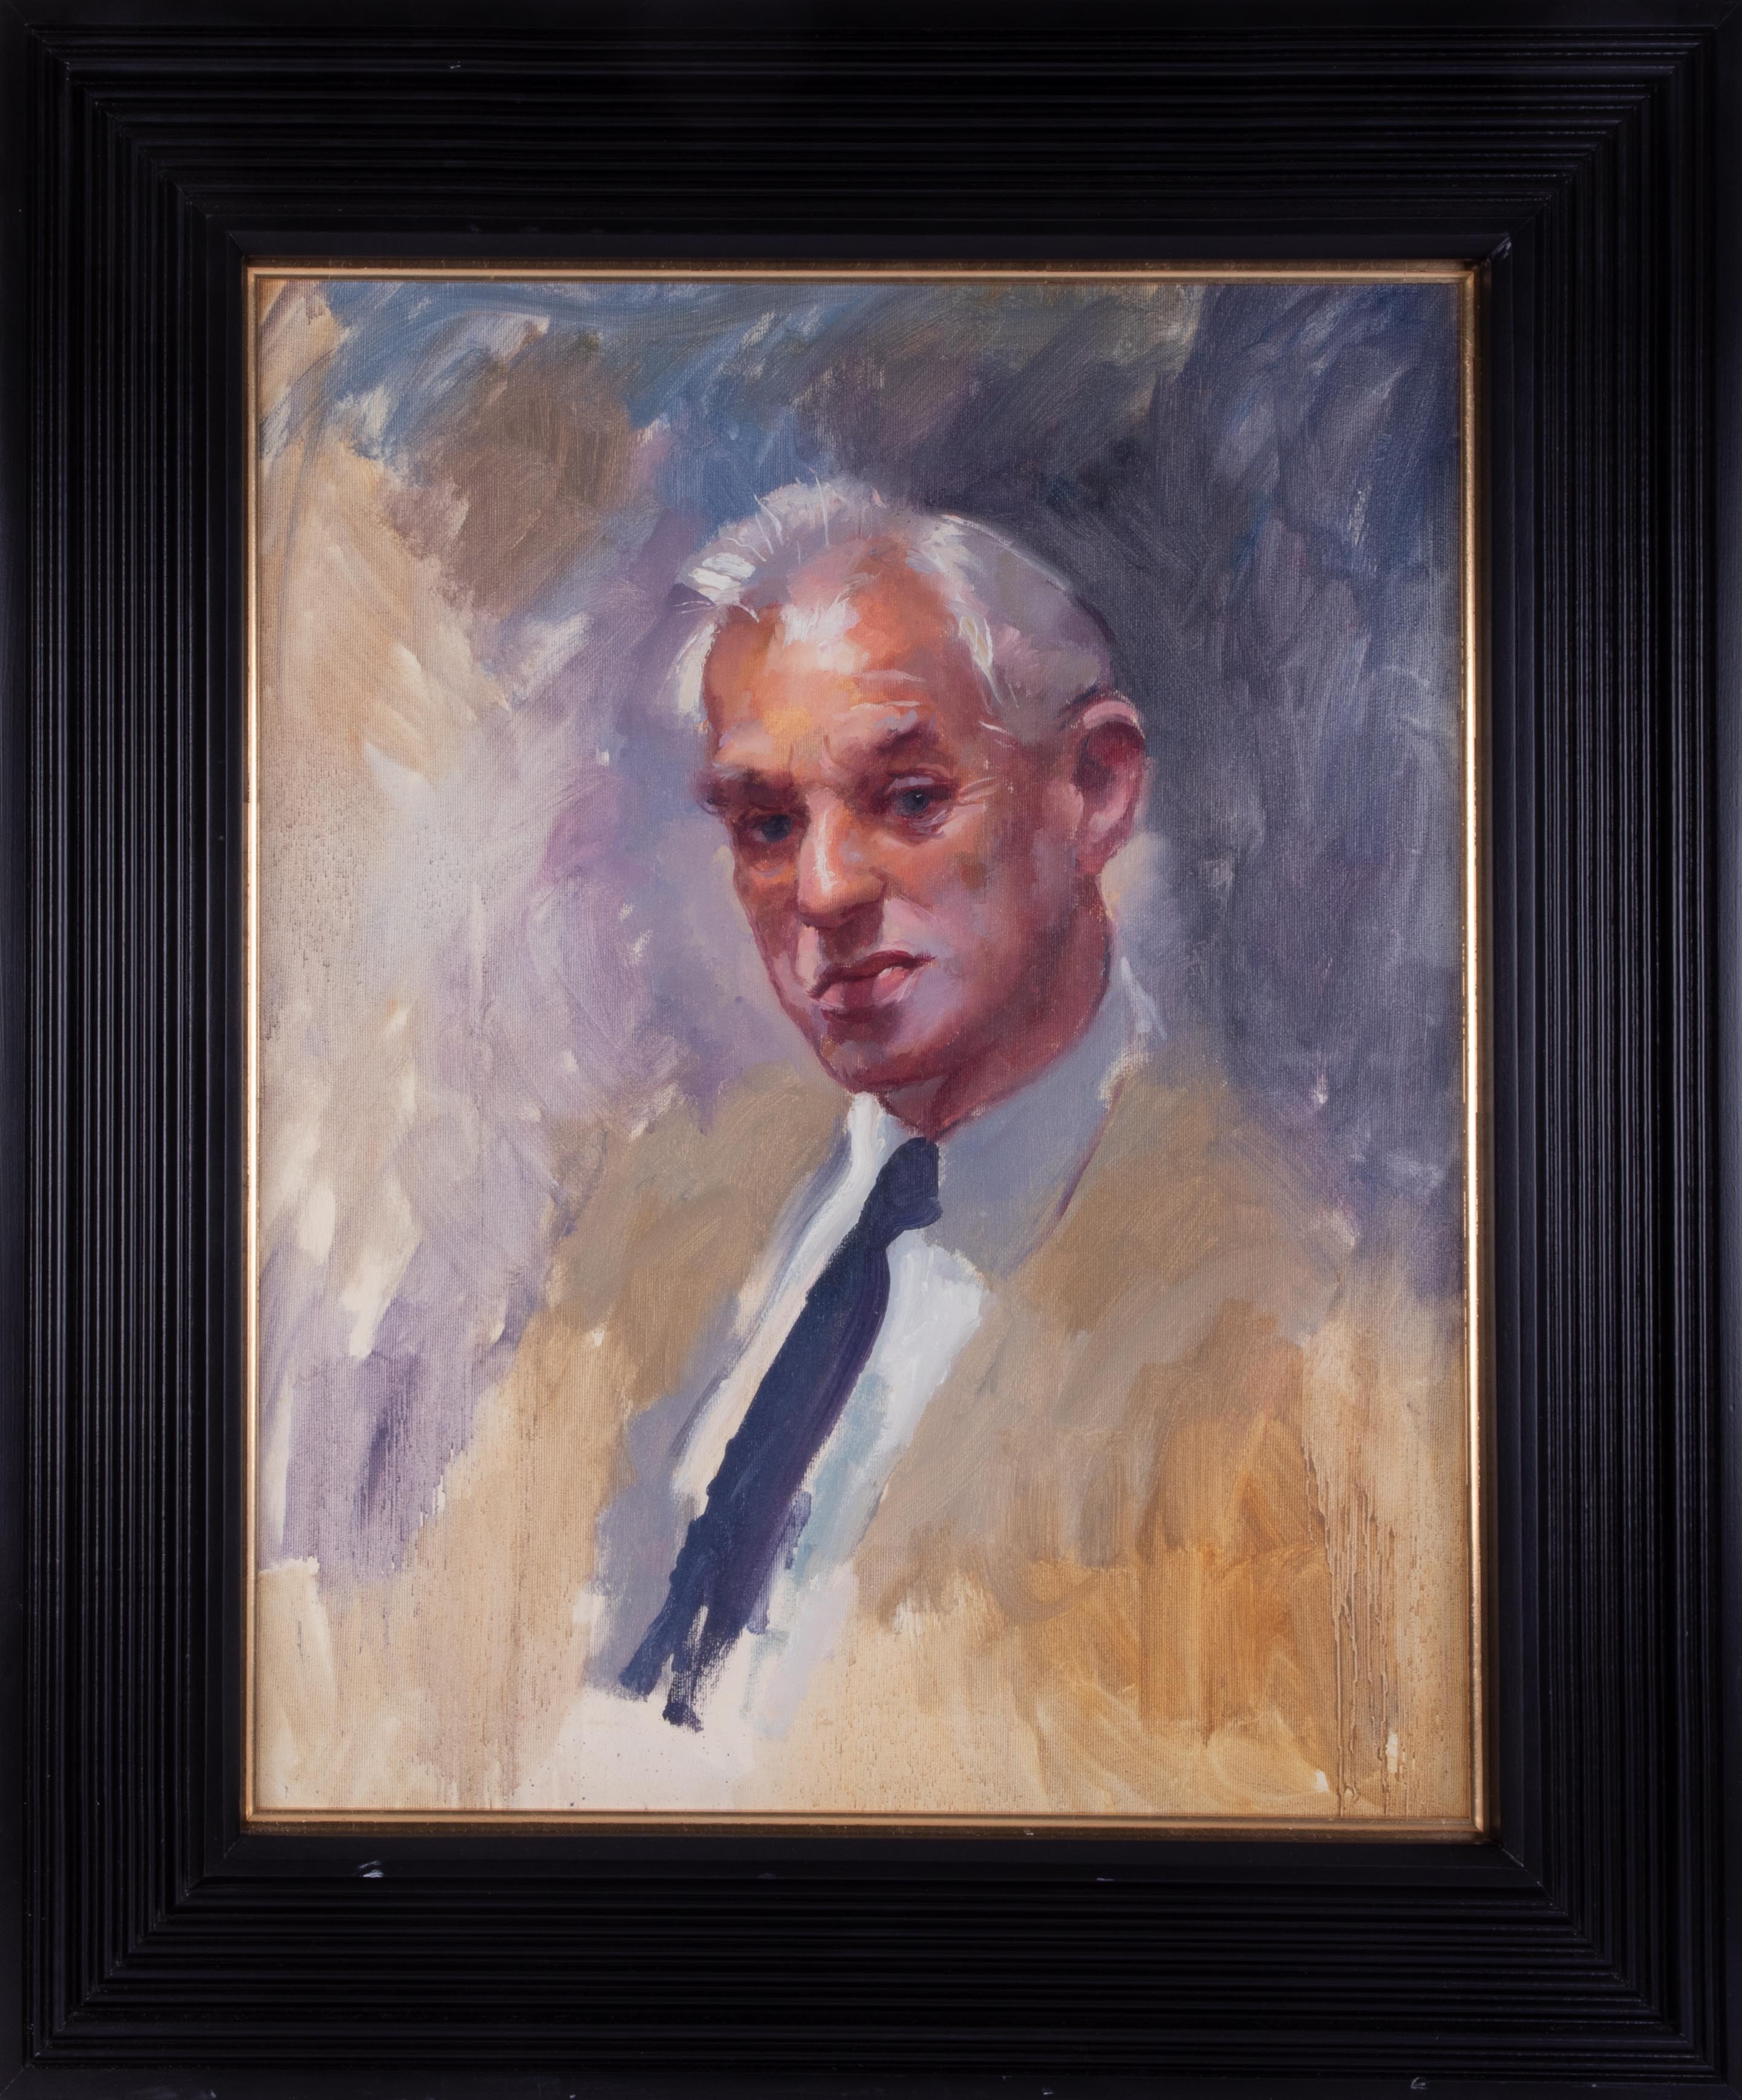 Robert Lenkiewicz (1941-2002), 'Mr Avery', oil on canvas, signed and inscribed on reverse, 'A J